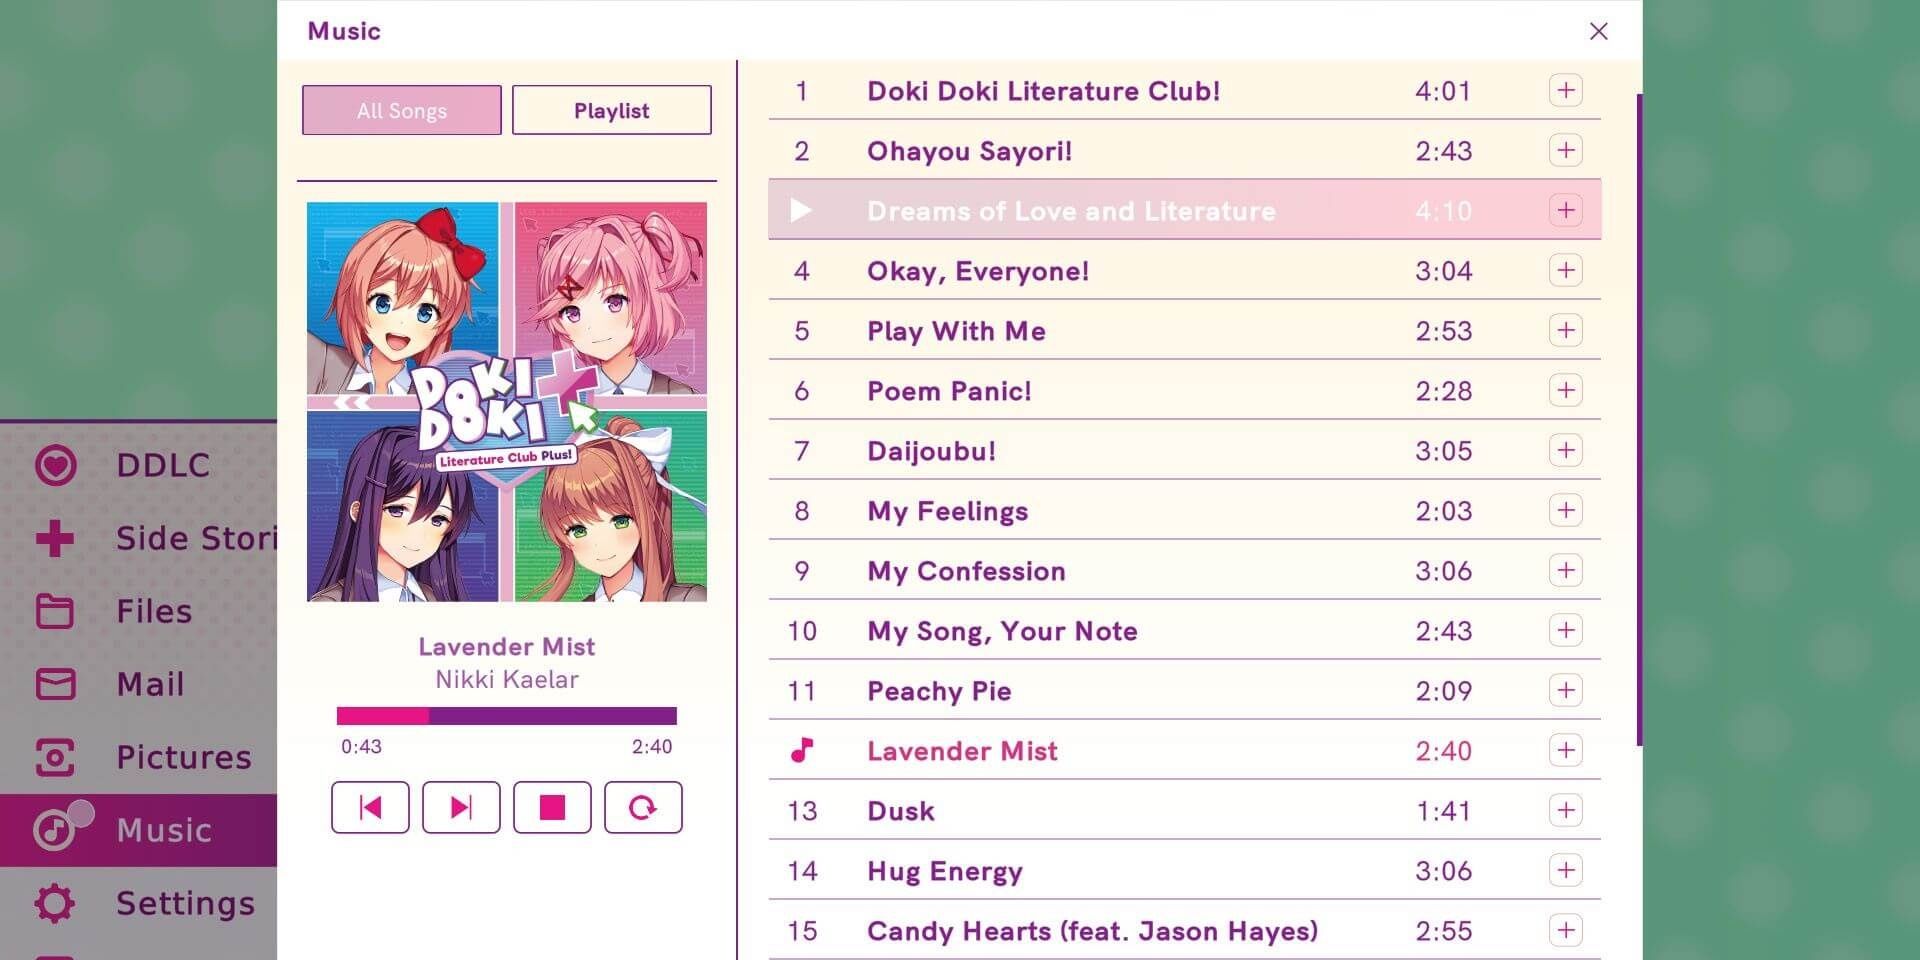 How the desktop looks with the music player popped up in Doki Doki Literature Club